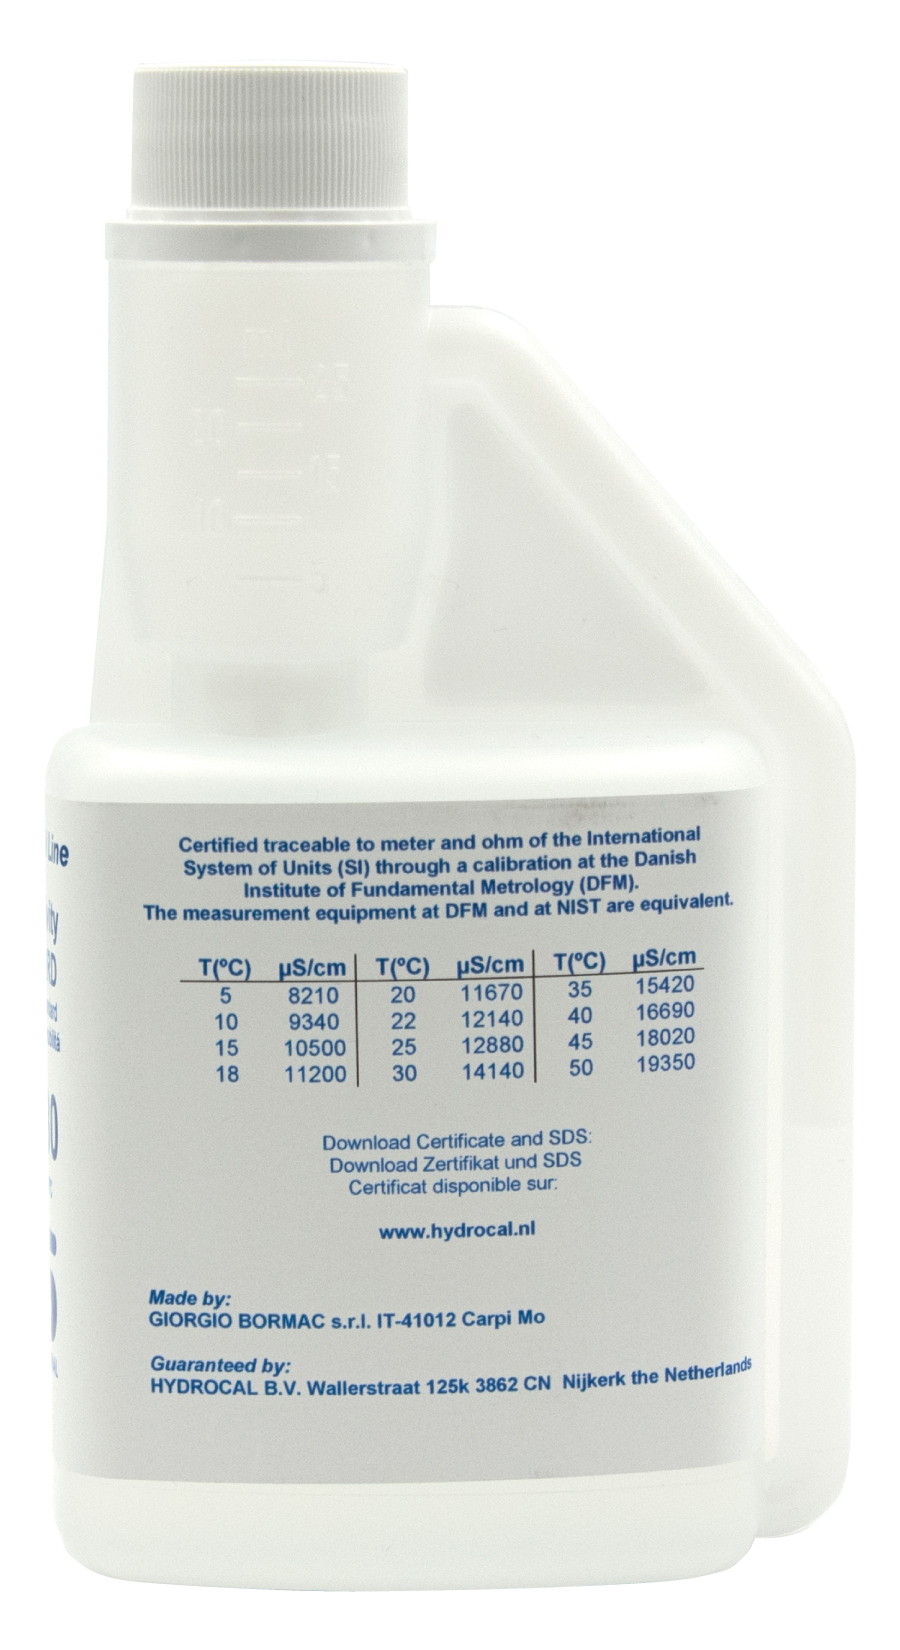 XS Professional 12880 µS/cm - 250ml conductivity calibration solution with DFM certificate